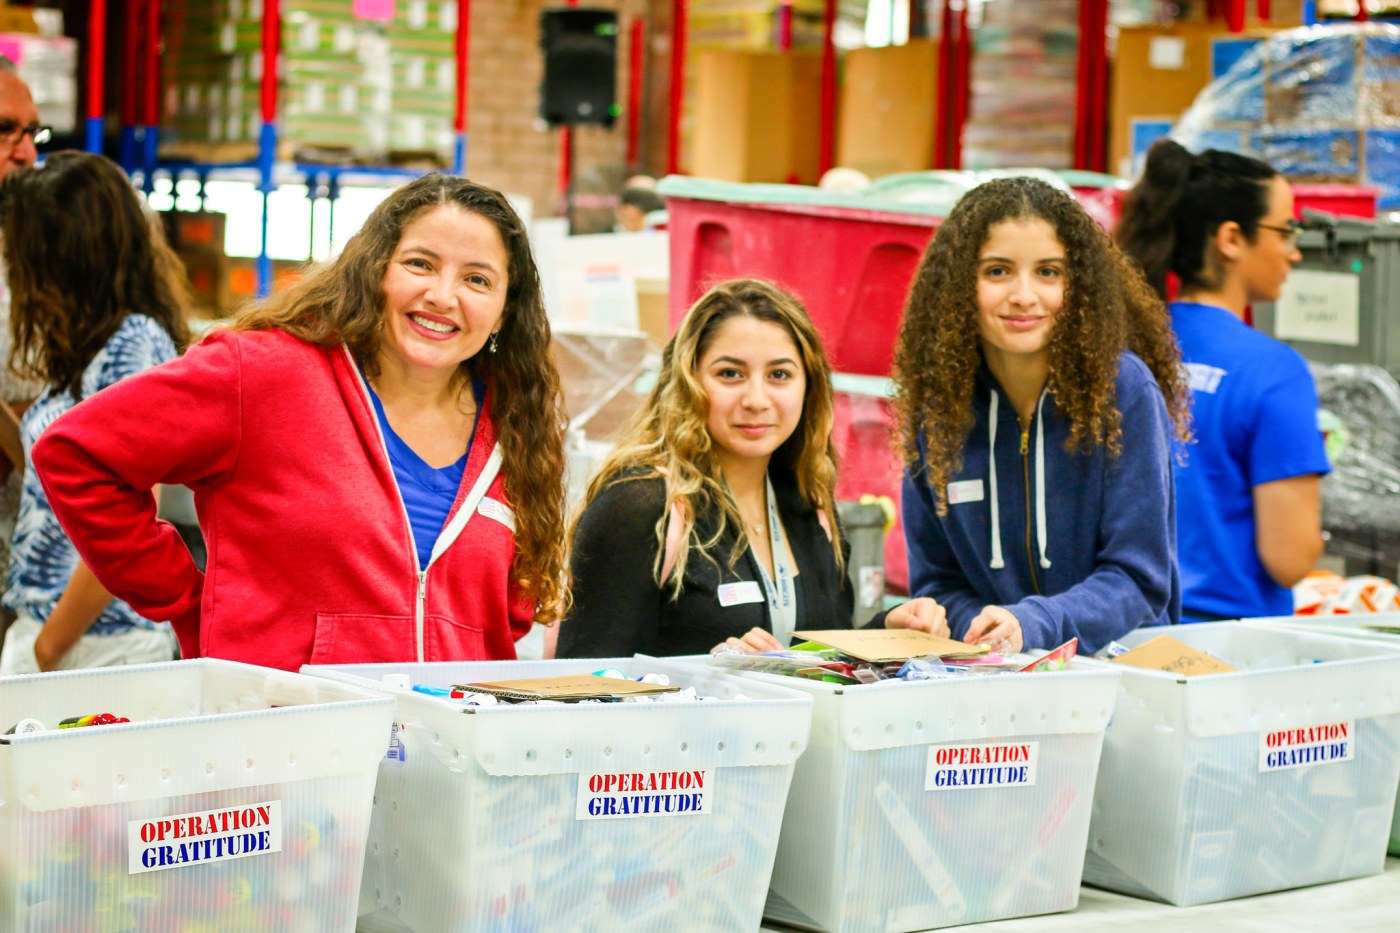 Volunteers needed in D.C. to assemble 25,000 care pouches for Operation Gratitude